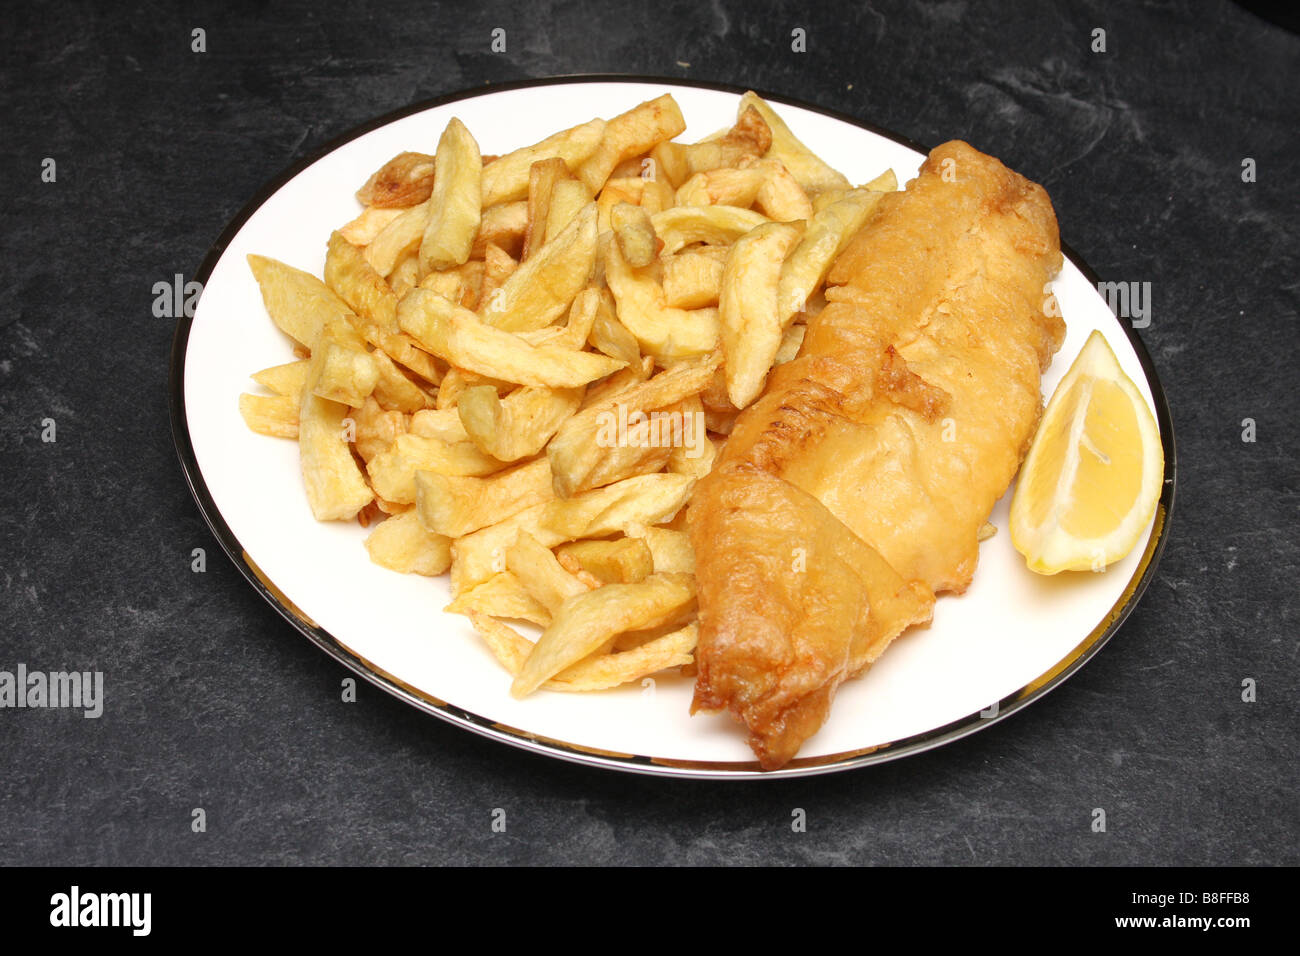 Fish and chips from a take away with a slice of lemon. Stock Photo